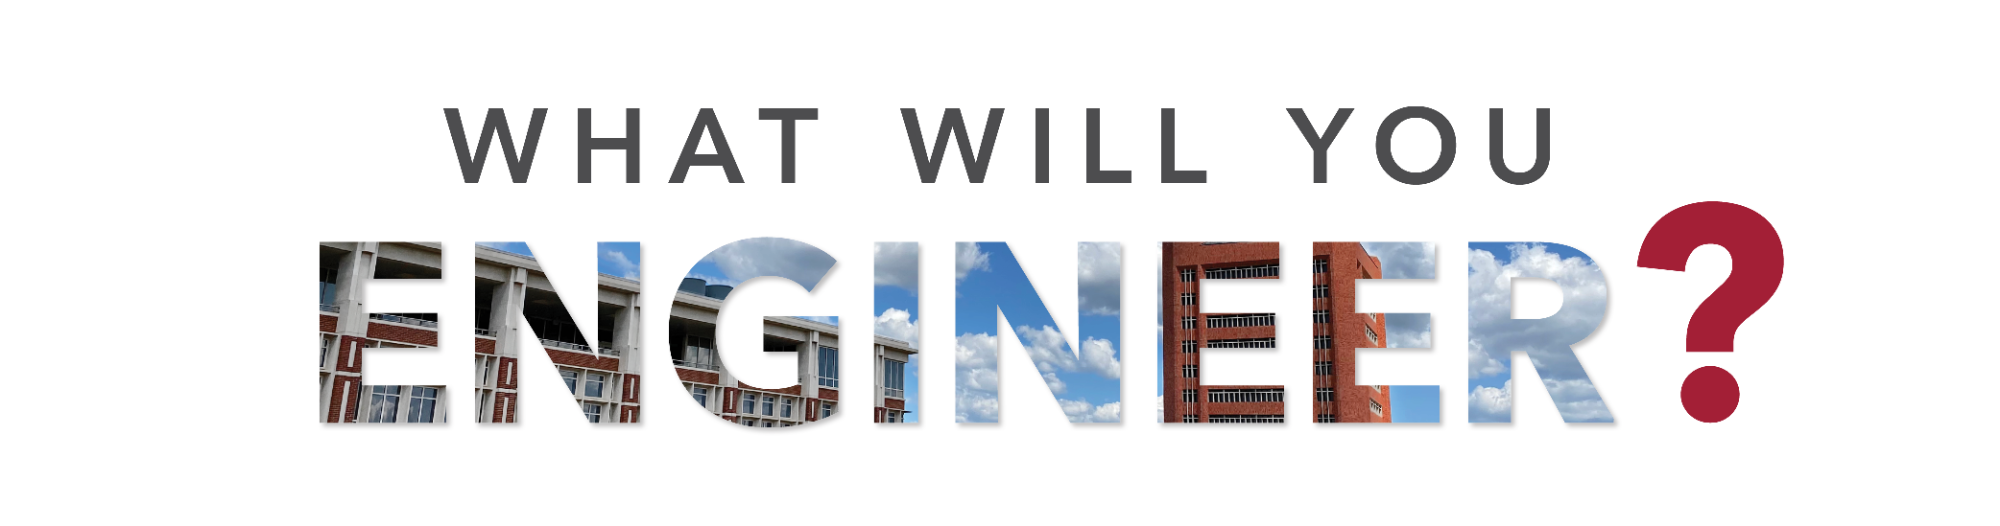 What will you engineer? header with building inside ENGINEER word.